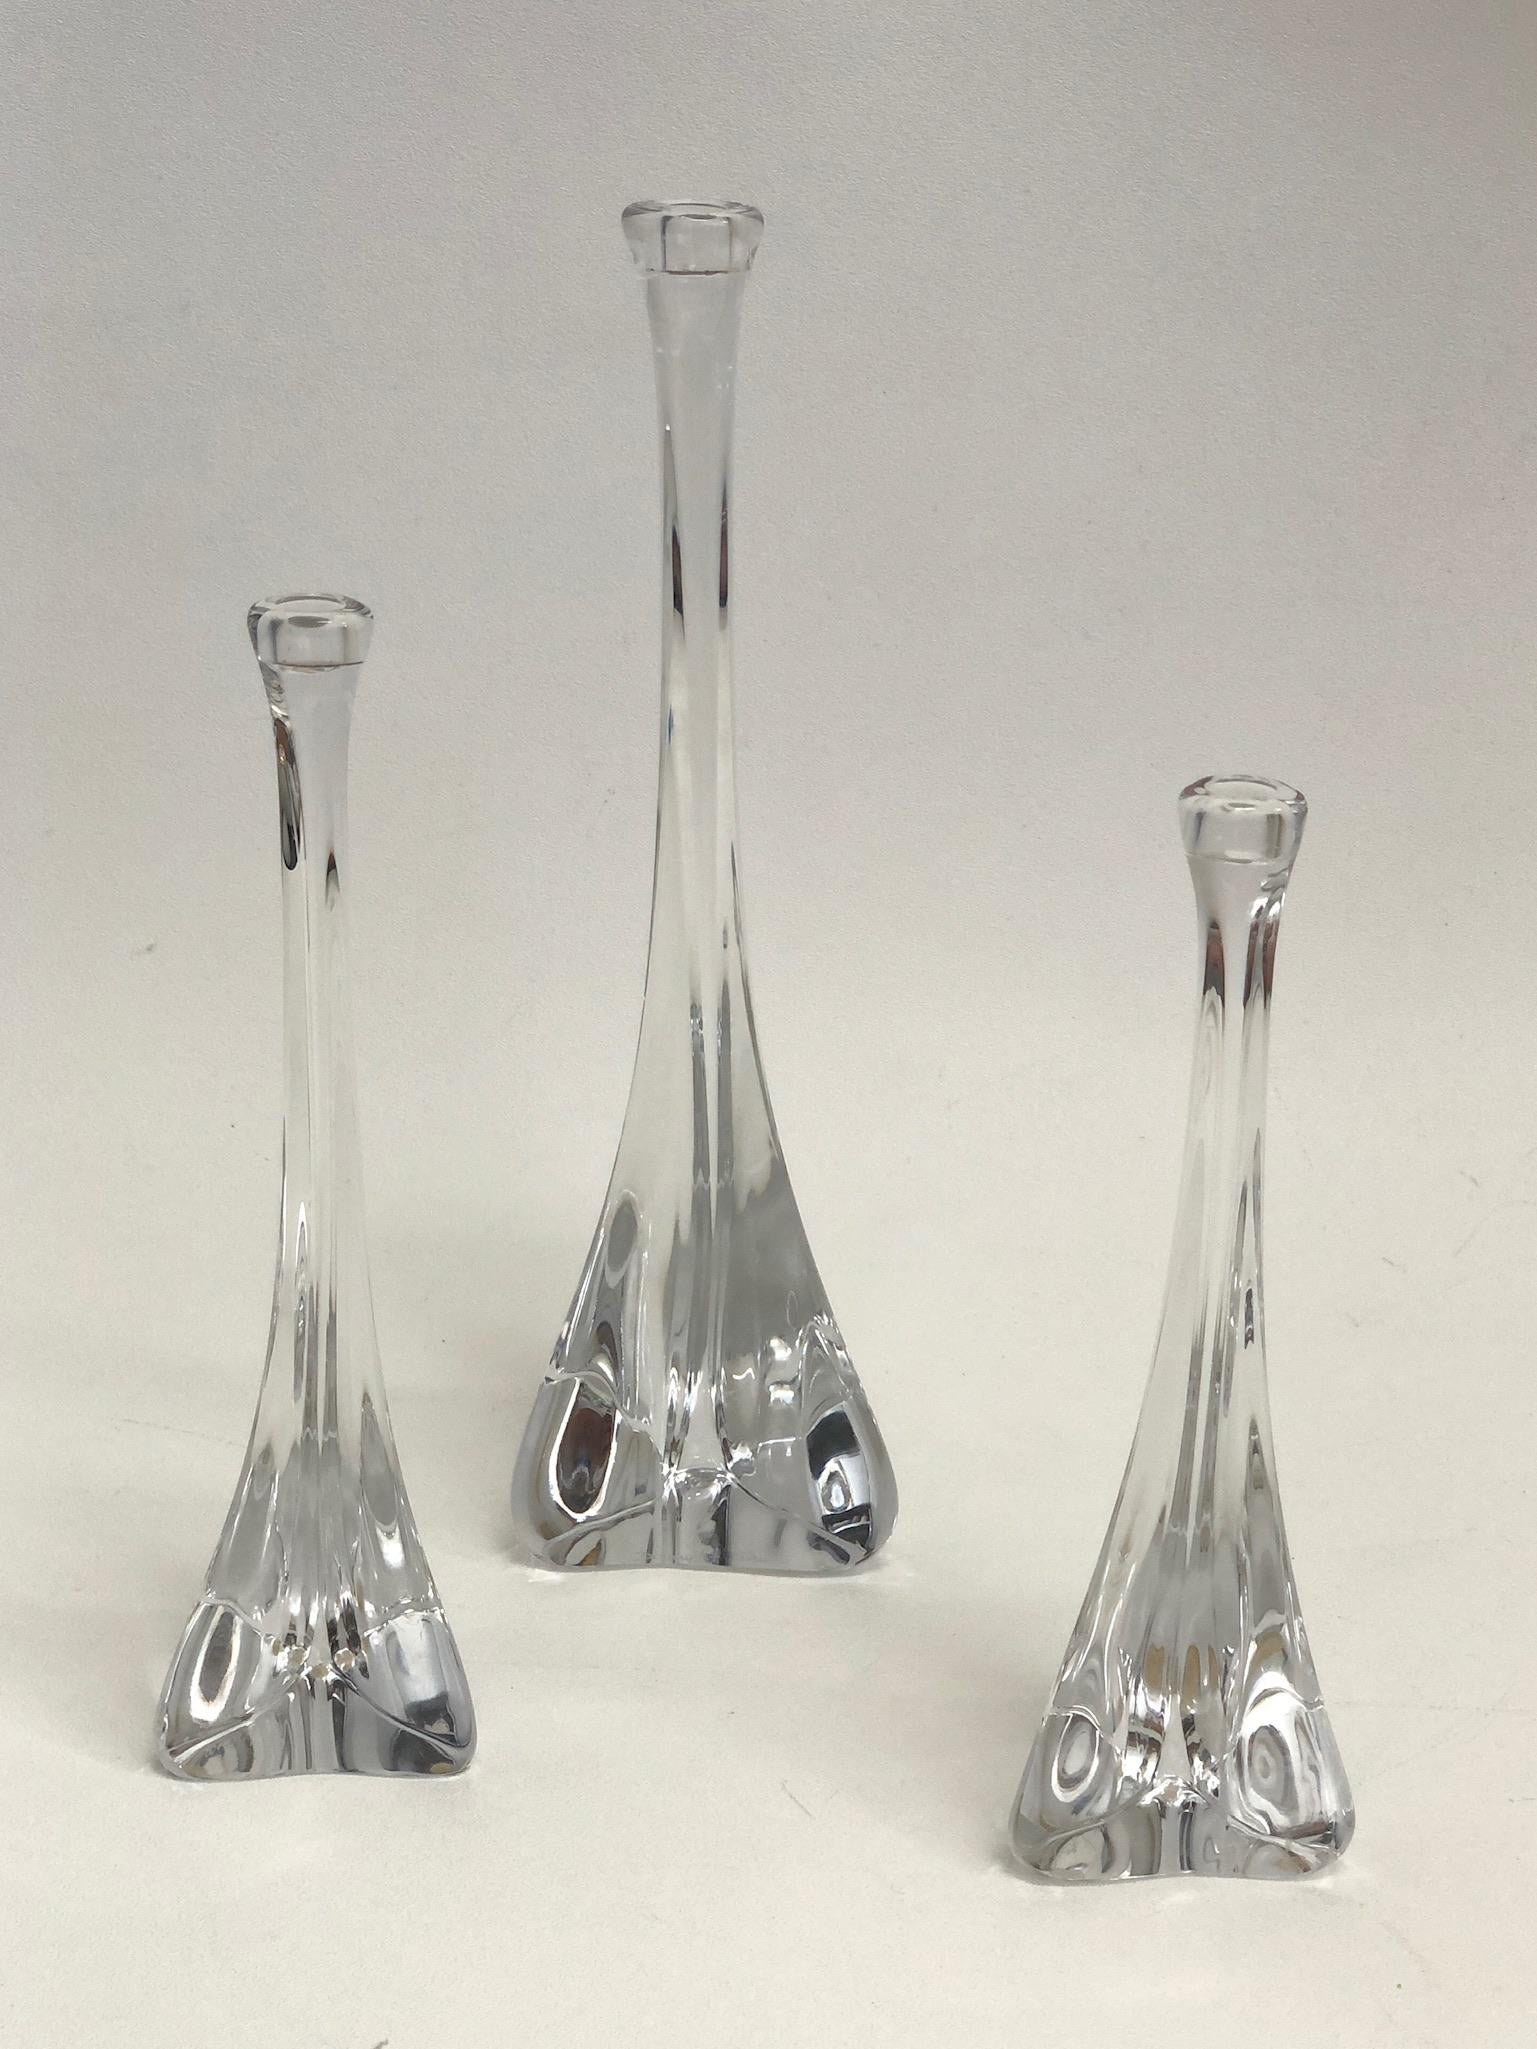 1970’s set of three French crystal candle holders by Daum.
This are hand blown with a triangular shaped bases.
They are all signed Daum France (see detail photos).

Measurements: 
L- 13” High 4” Wide 4” Deep.
M- 10.25” High 3” Wide 3”